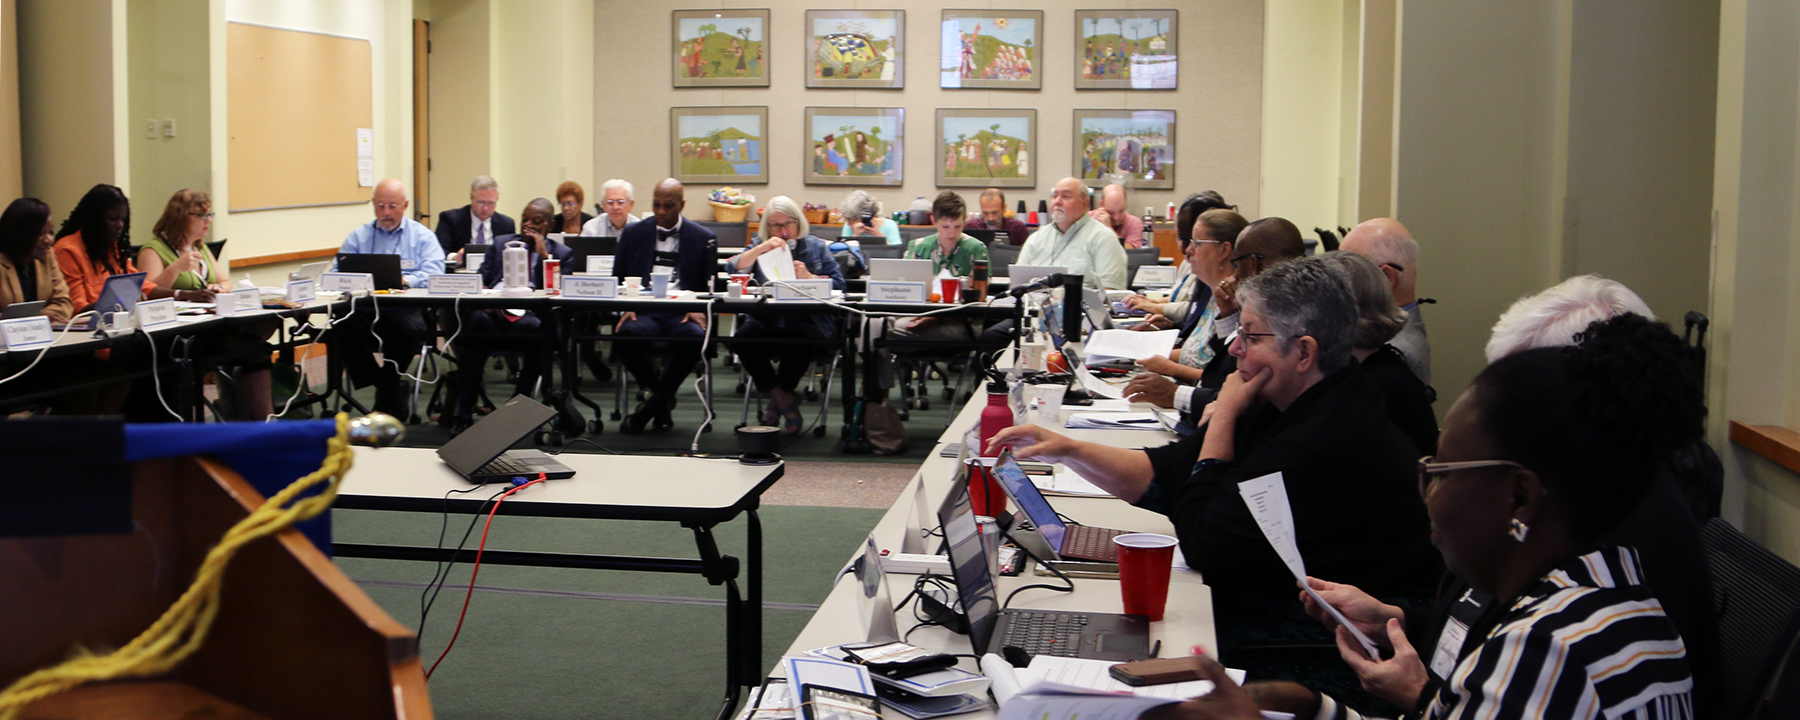 COGA holds its fall meeting at the Presbyterian Center in Louisville. Photo by Randy Hobson.